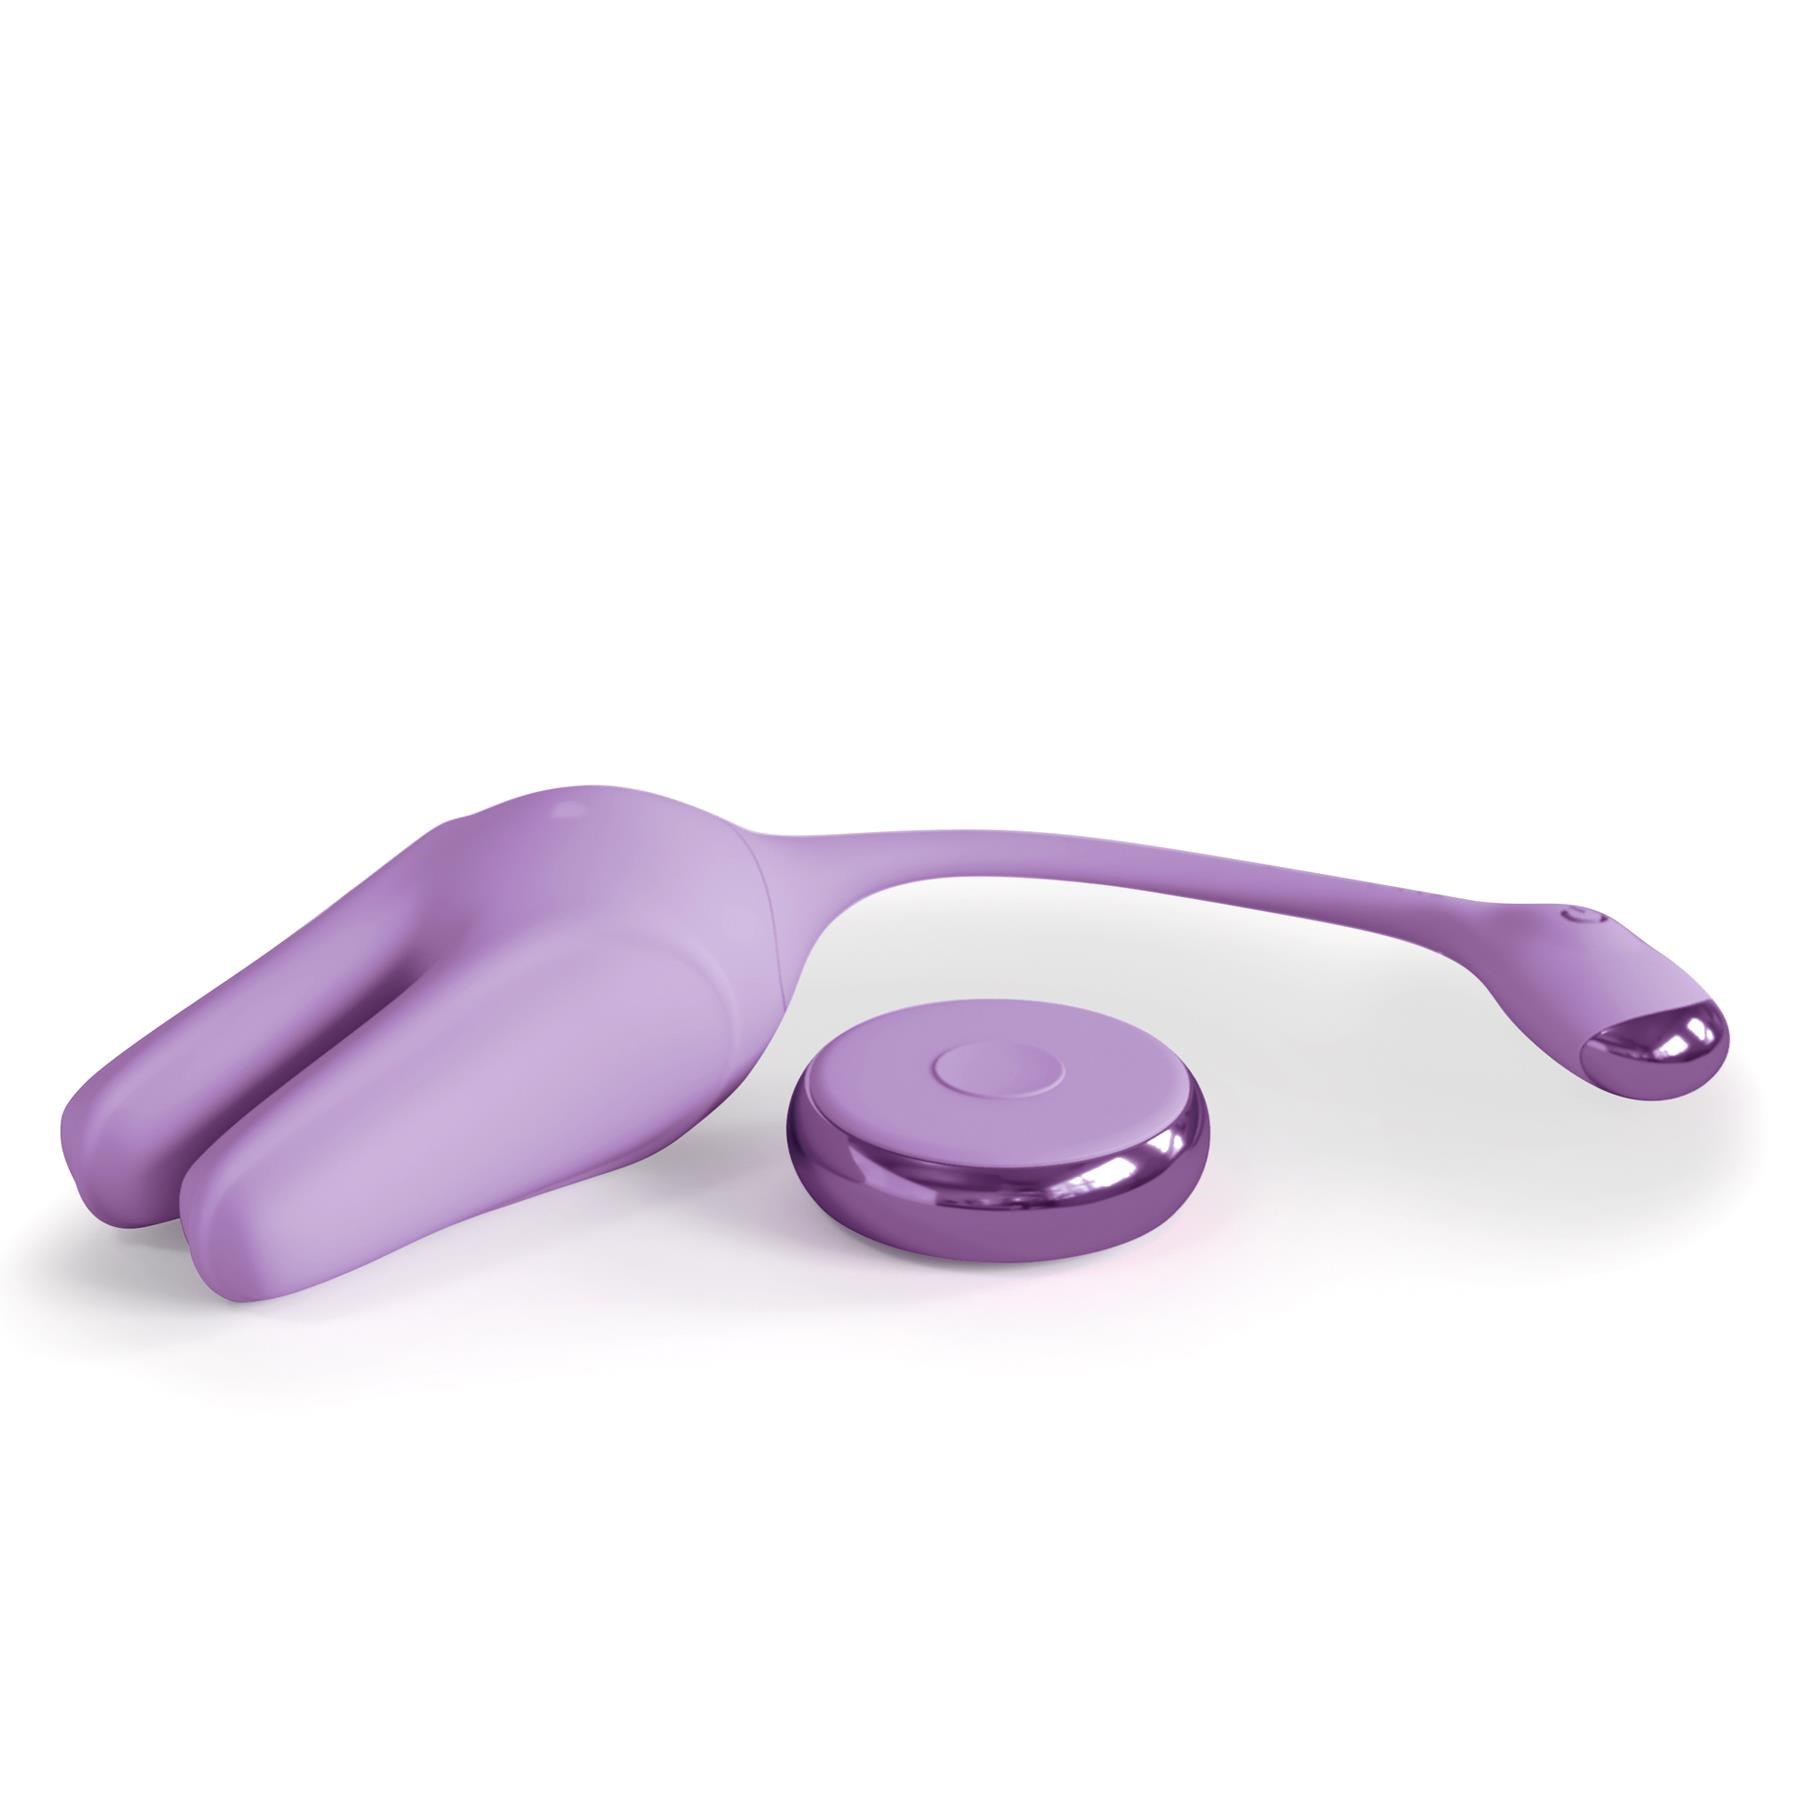 Jimmy Jane Form 2 Kegel Trainer With Remote Control - Product and Remote